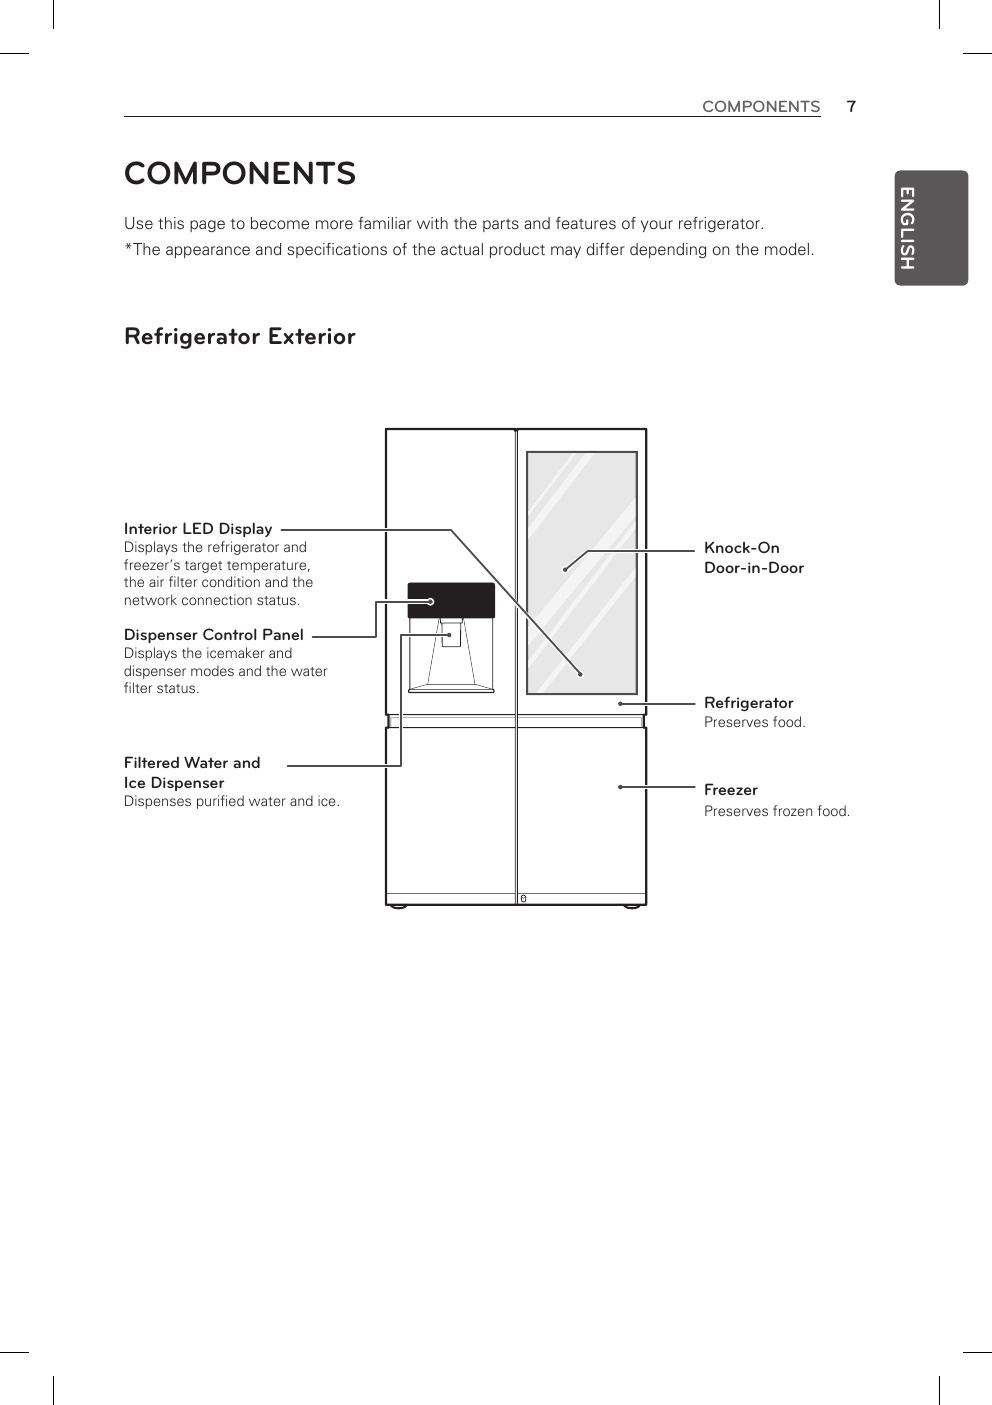 7COMPONENTSENGLISHCOMPONENTS Use this page to become more familiar with the parts and features of your refrigerator. *The appearance and specifications of the actual product may differ depending on the model. Refrigerator ExteriorInterior LED Display Displays the refrigerator and freezer’s target temperature, the air filter condition and the network connection status.RefrigeratorPreserves food.FreezerPreserves frozen food.Dispenser Control Panel Displays the icemaker and dispenser modes and the water filter status. Filtered Water and  Ice DispenserDispenses purified water and ice.Knock-On  Door-in-Door